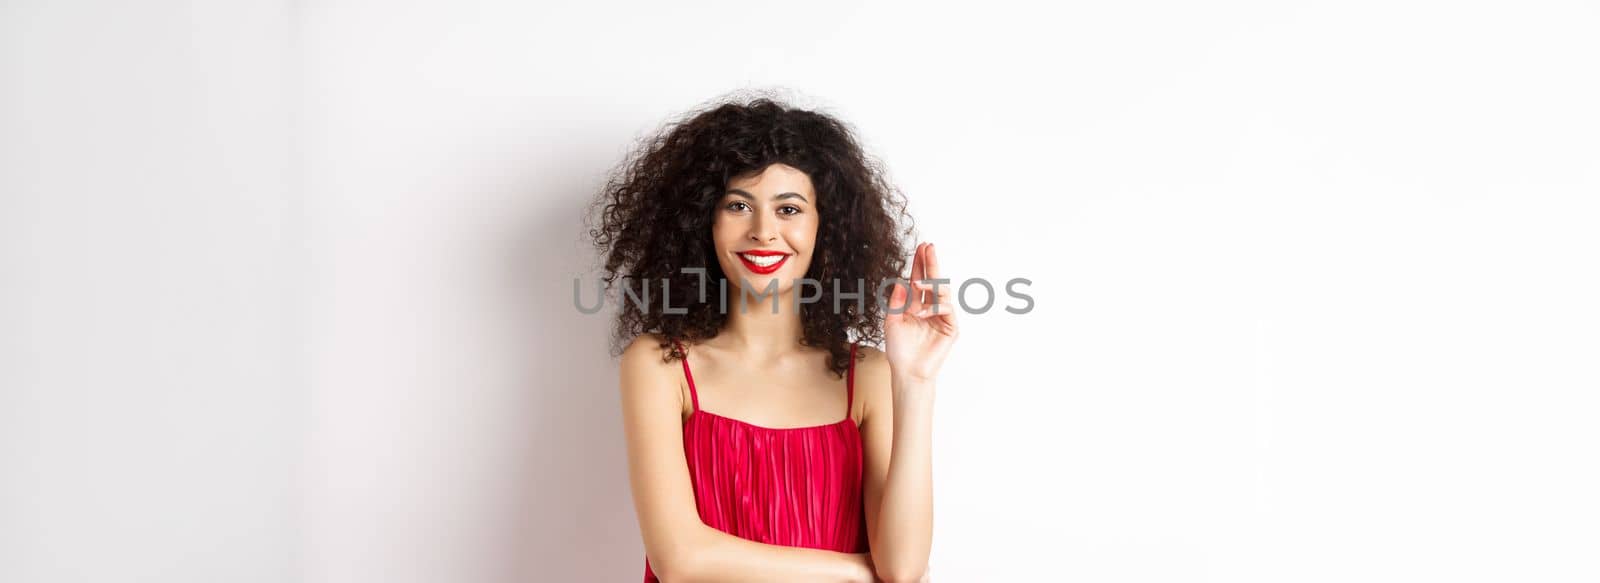 Beauty and fashion. Smiling woman with curly hair and makeup, wearing red dress, waving hand in greeting gesture, saying hello, standing on white background.